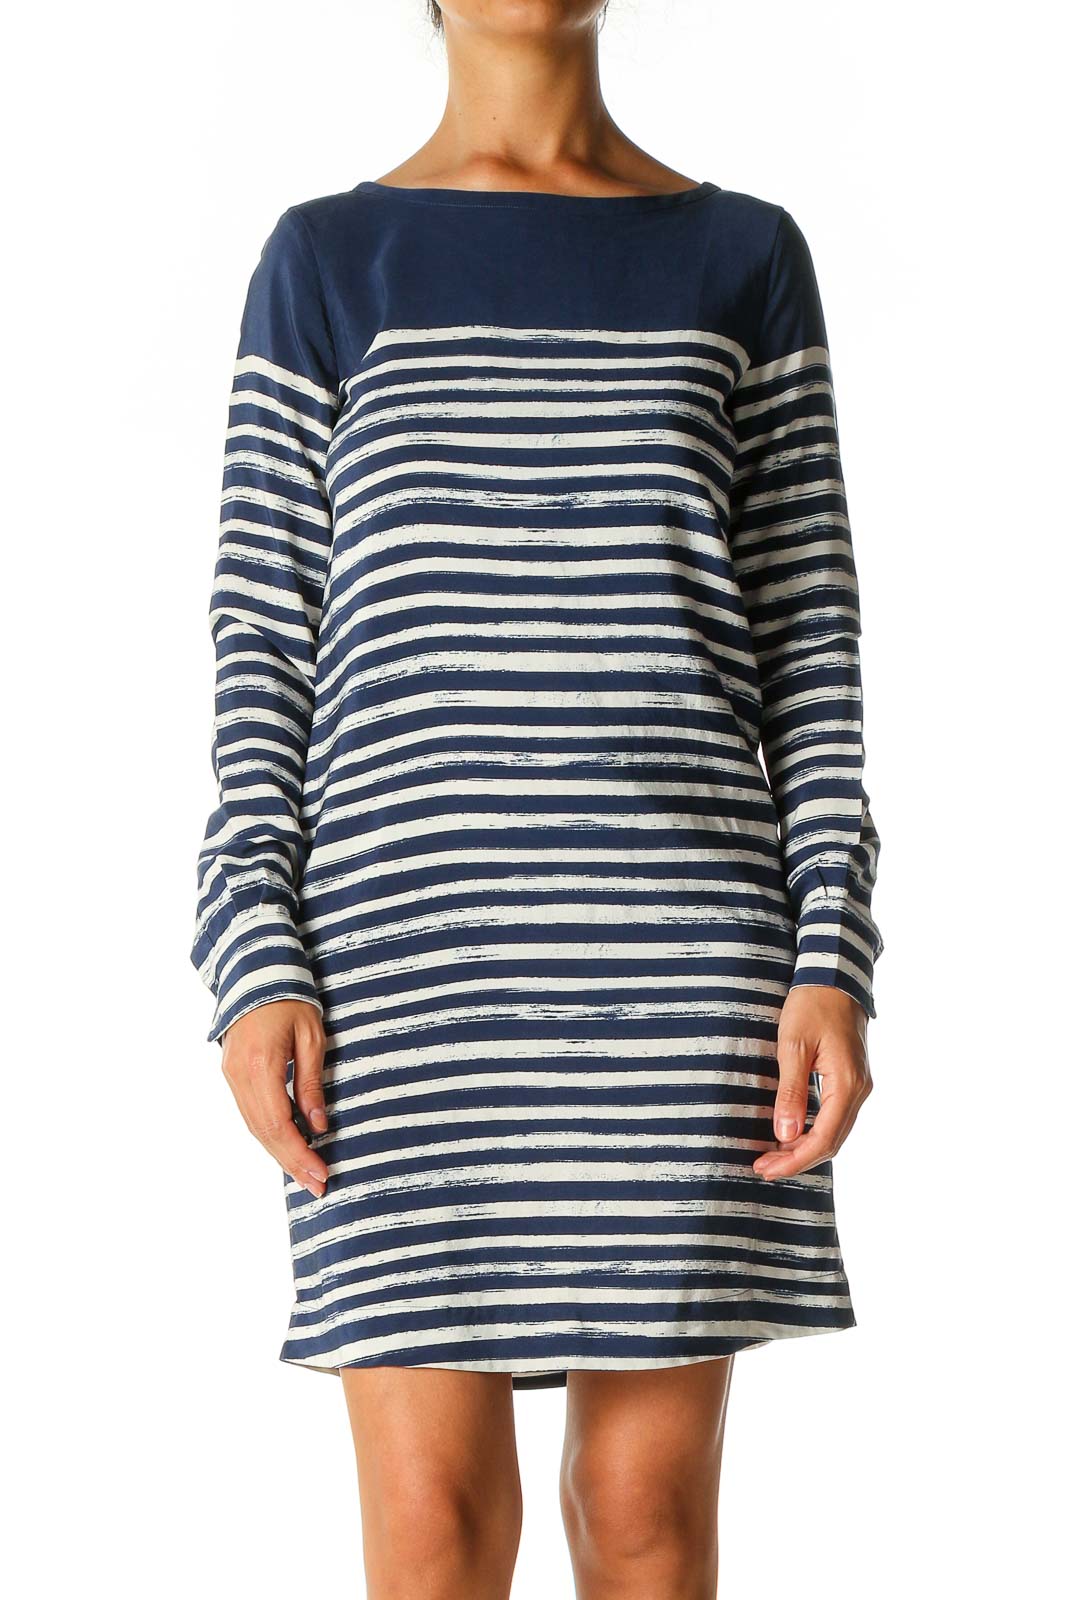 Blue Striped Casual A-Line Dress Front